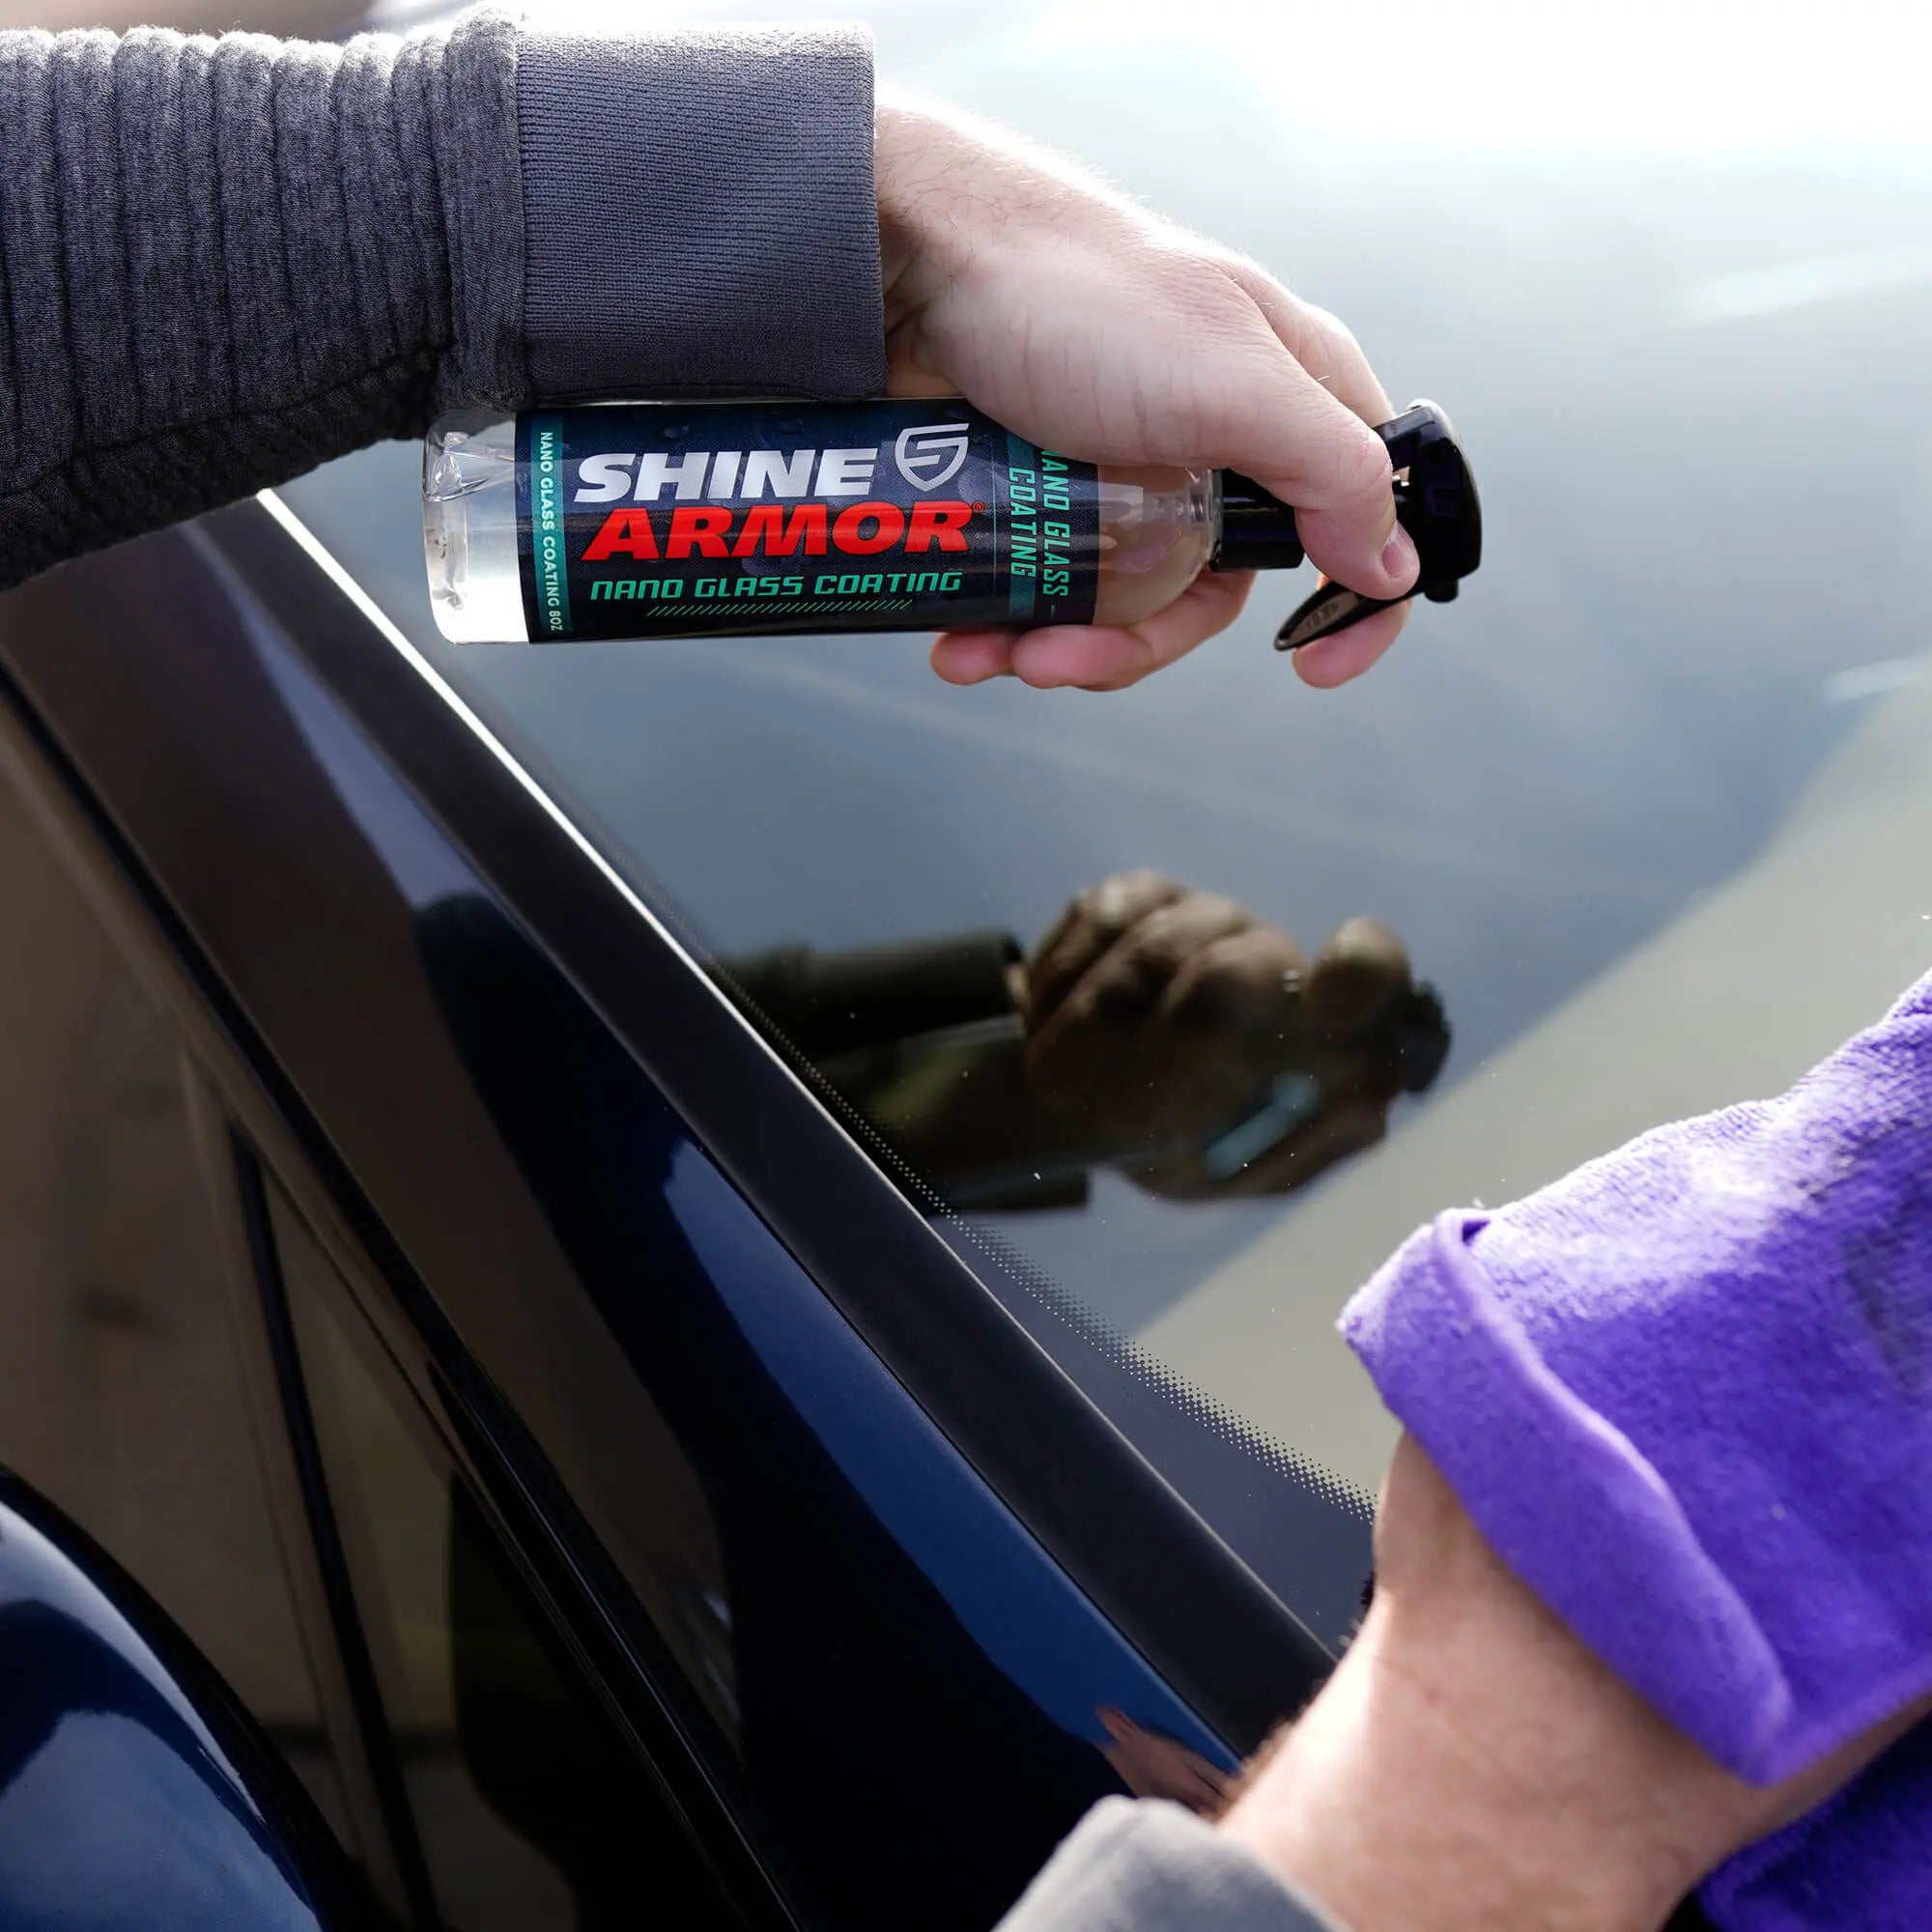 SHINE ARMOR Graphene Ceramic Coating for Cars | Highly Concentrated for  Vehicle Paint Protection and Shine with Hydrophobic Top Coat SiO2  Technology